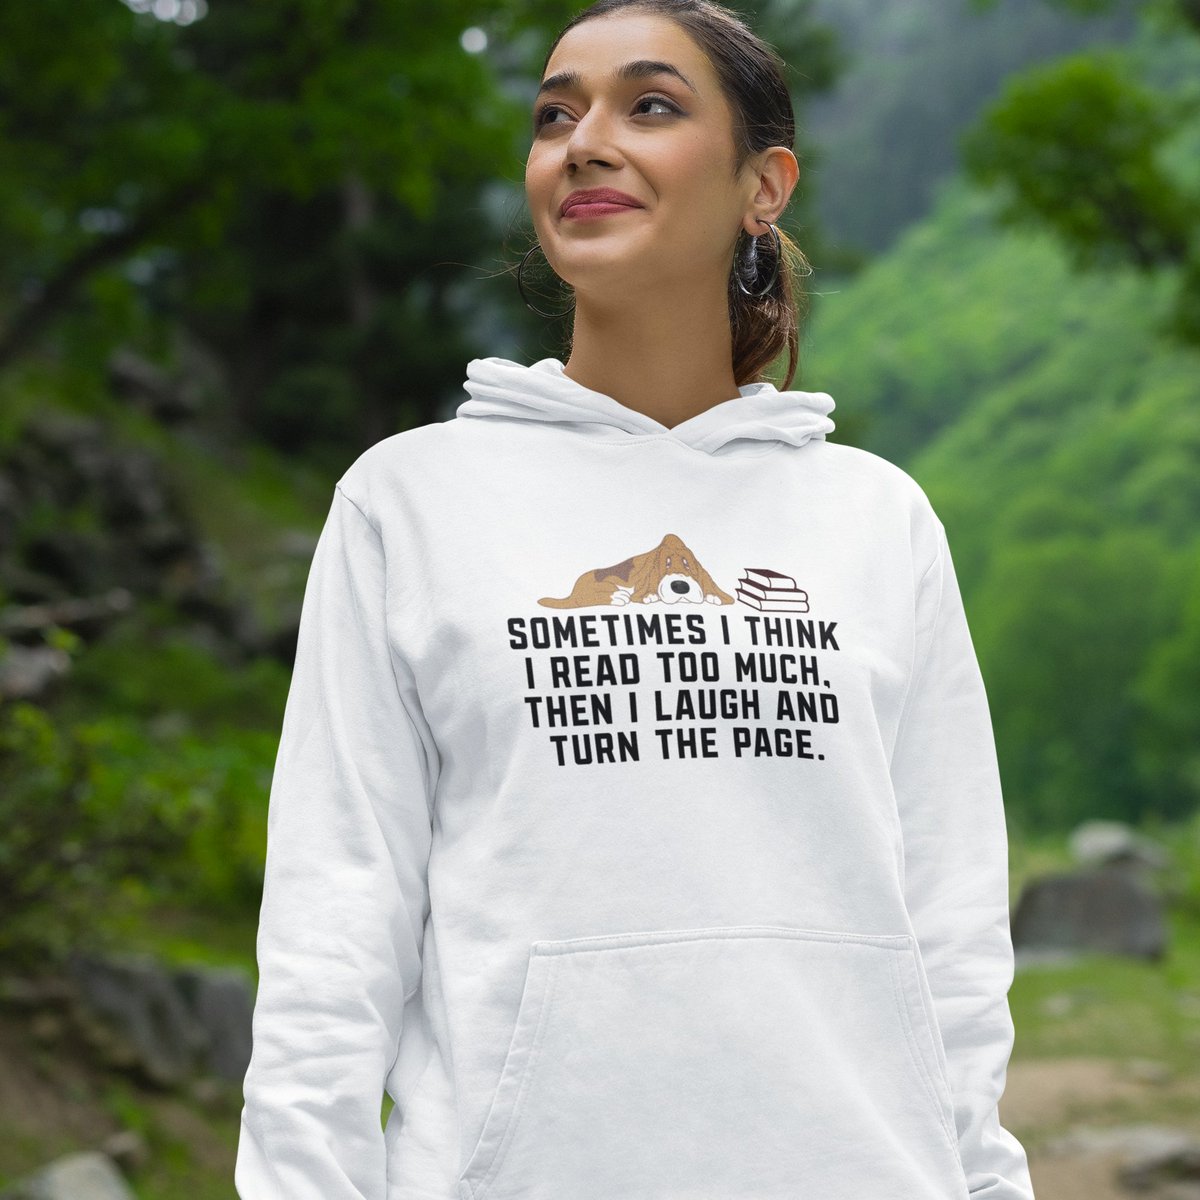 Sometimes I Think I Read Too Much Then I Lough And Turn The Page Sweatshirt, T-Shirt, Hoodie

#doglovertshirt #dogtshirt #tshirts #doglover #dogtshirts #doglovers #dogs #dog #k #dogmomshirt #dogstshirt #tshirt #dogloversclub #shoponline #catlovertshirt #dogmomtshirt